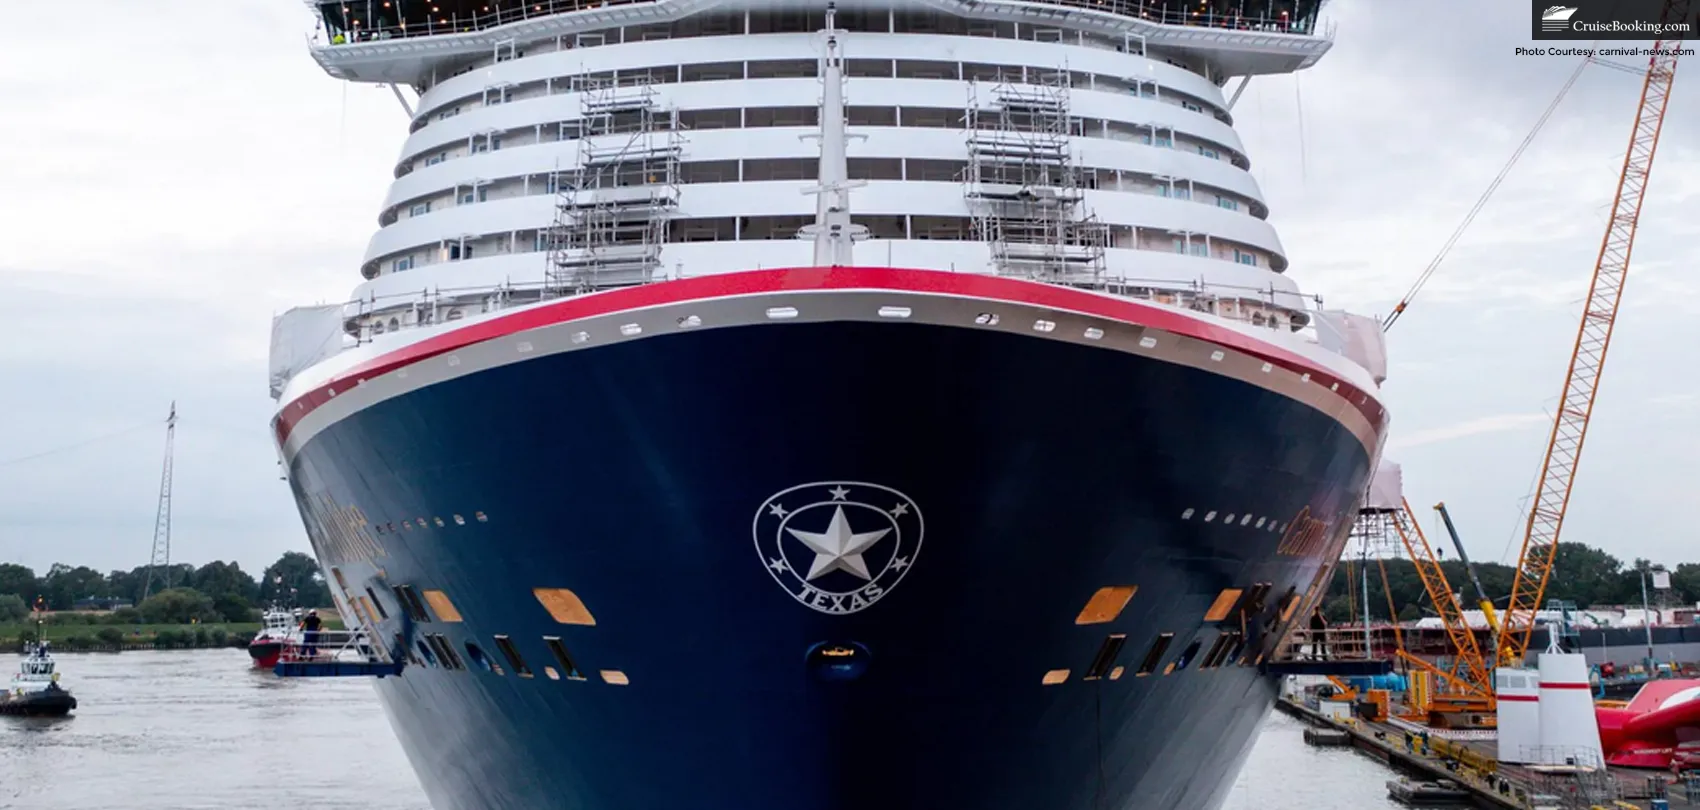 Carnival Jubilee Floats Out and Reveals Texas Star on Bow